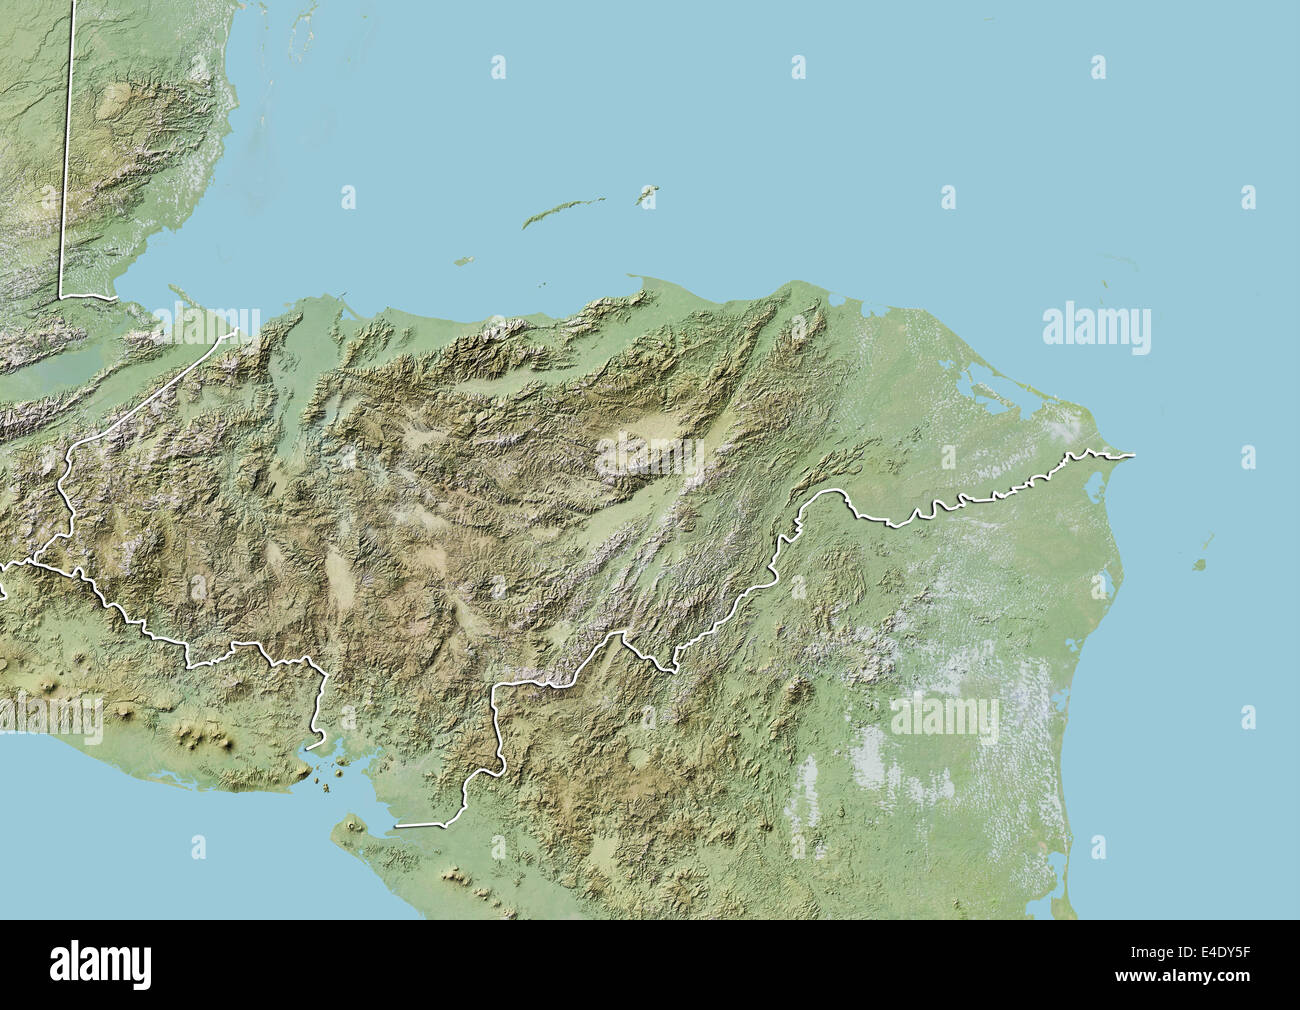 Honduras, Relief Map With Border Stock Photo